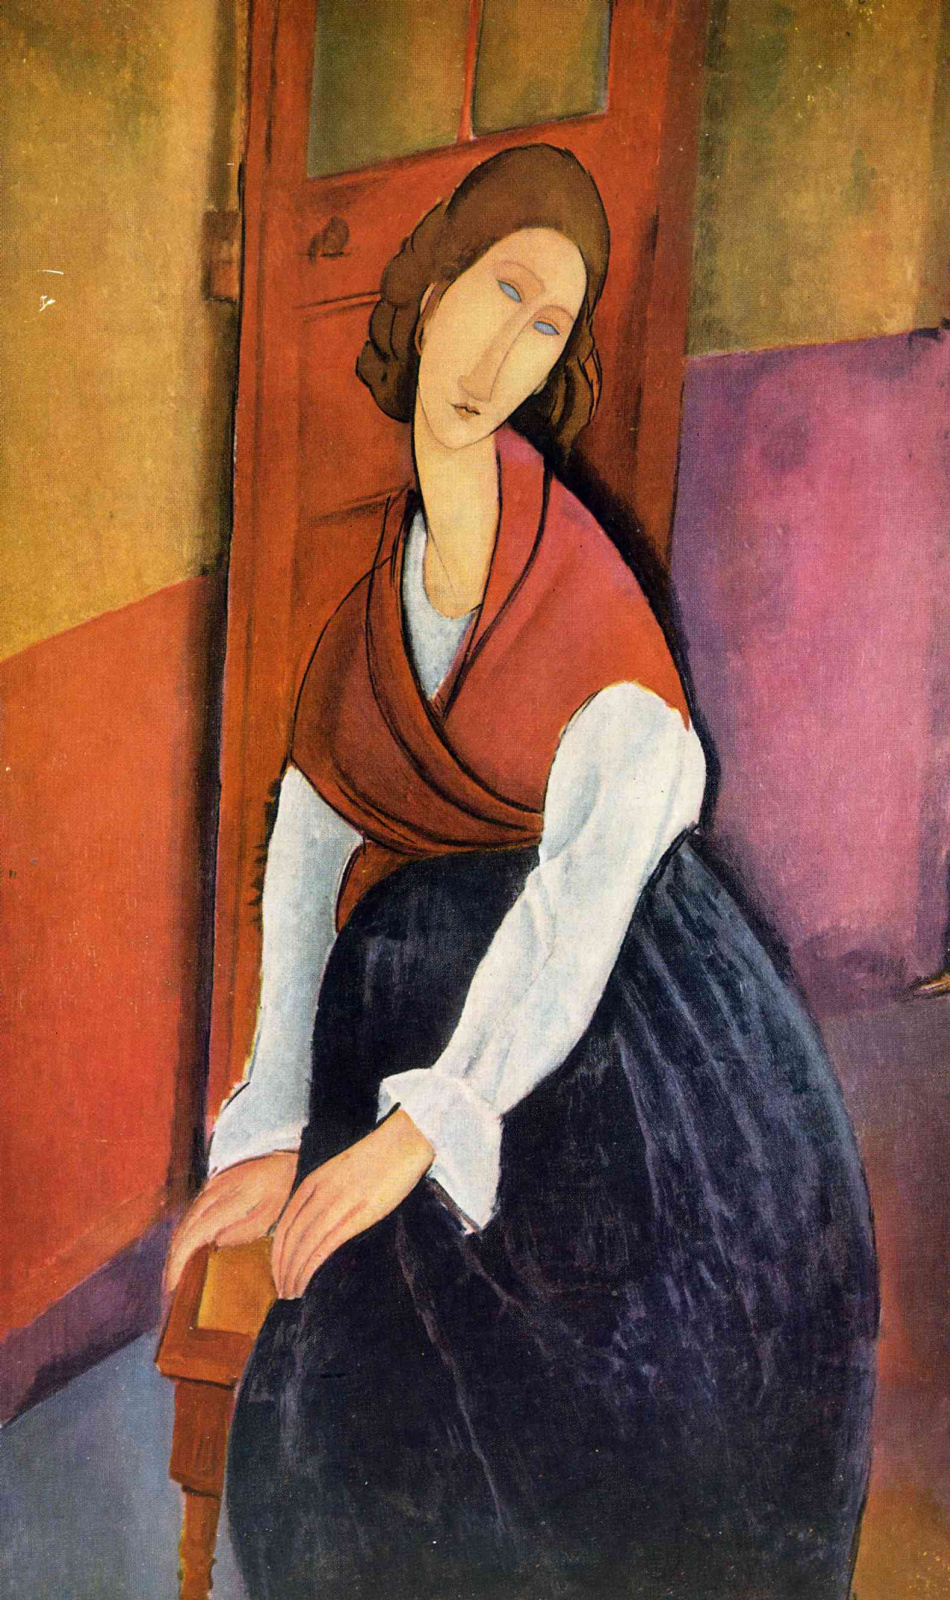 Amedeo Modigliani. Jeanne hébuterne, seated in front of the door